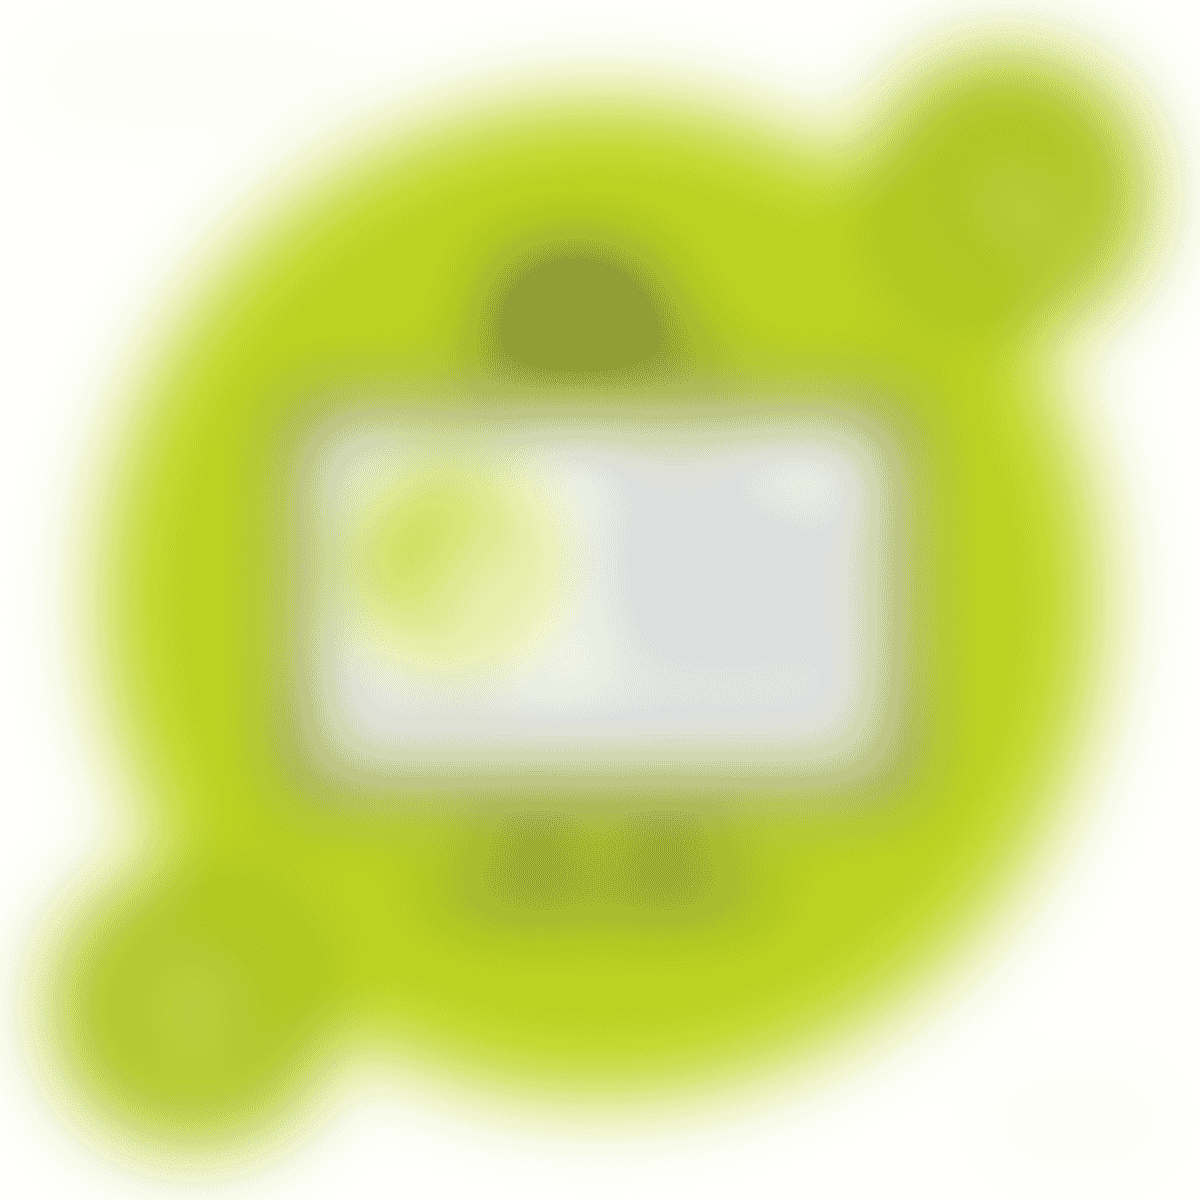 Green circle with a computer graphic in the middle with MadCap Flare logo inside